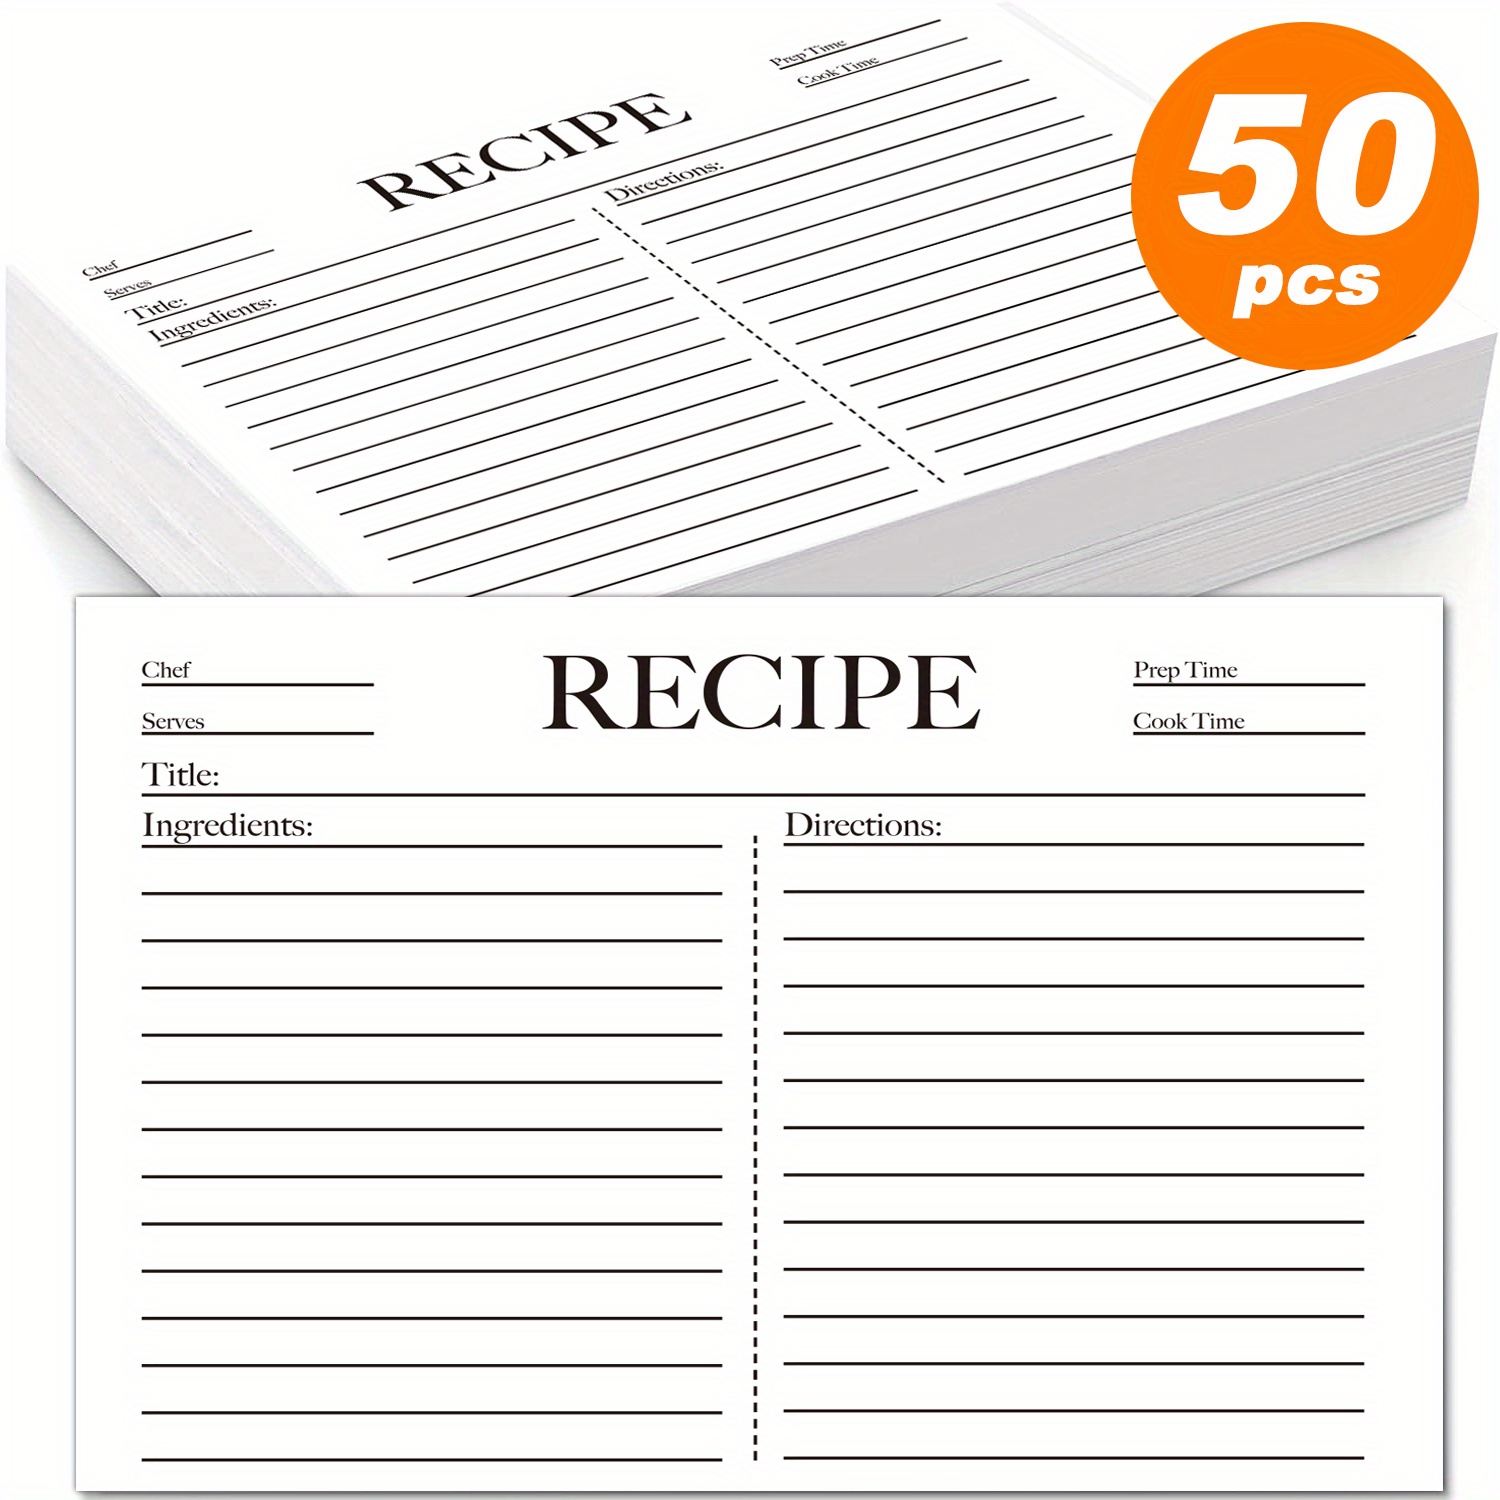 25pcs Kitchens Recipe Card Double Sided Blank Cards DIY Recipe Book 10*14cm